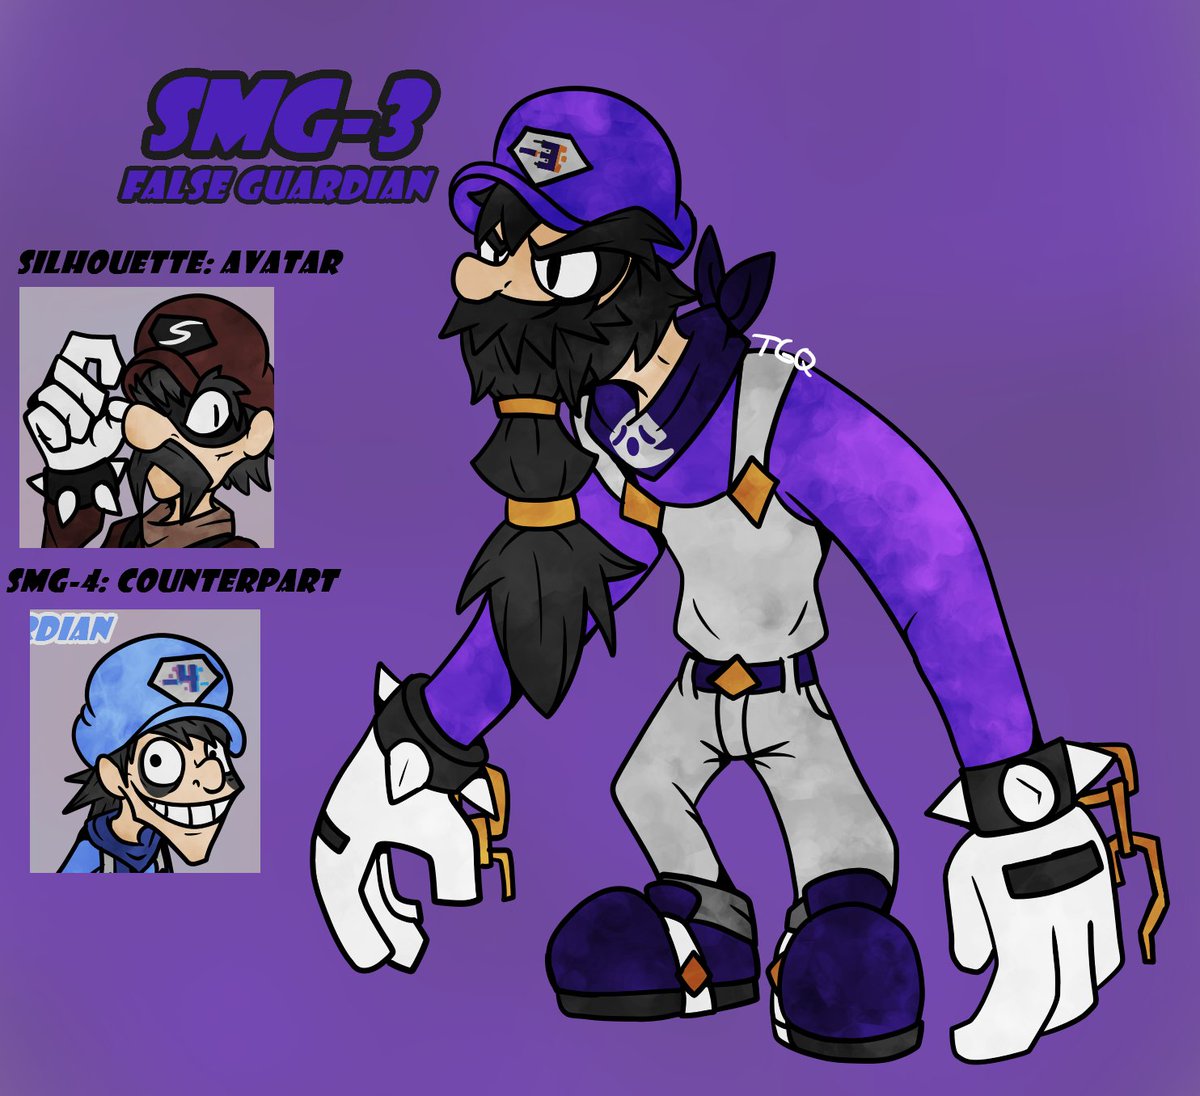 you guys liked SMG-4 and Silhouette, so now introducing: SMG-3, the False Guardian #SMG4 #smg4fanart